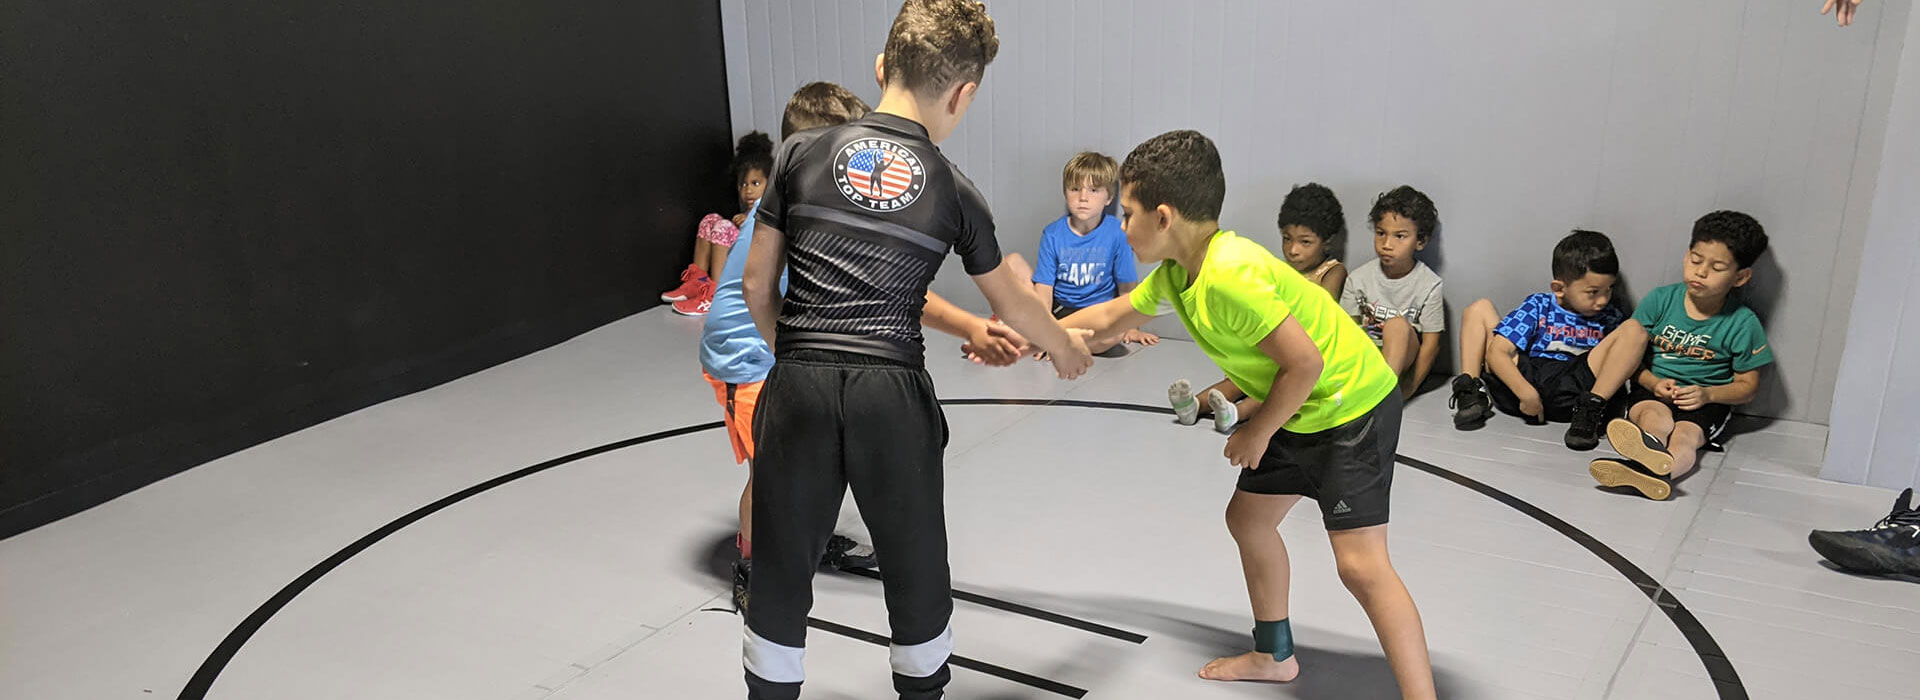 Why Scanlan Wrestling Academy Is Ranked One of the Best Wrestling Training Facilities In Ashburn